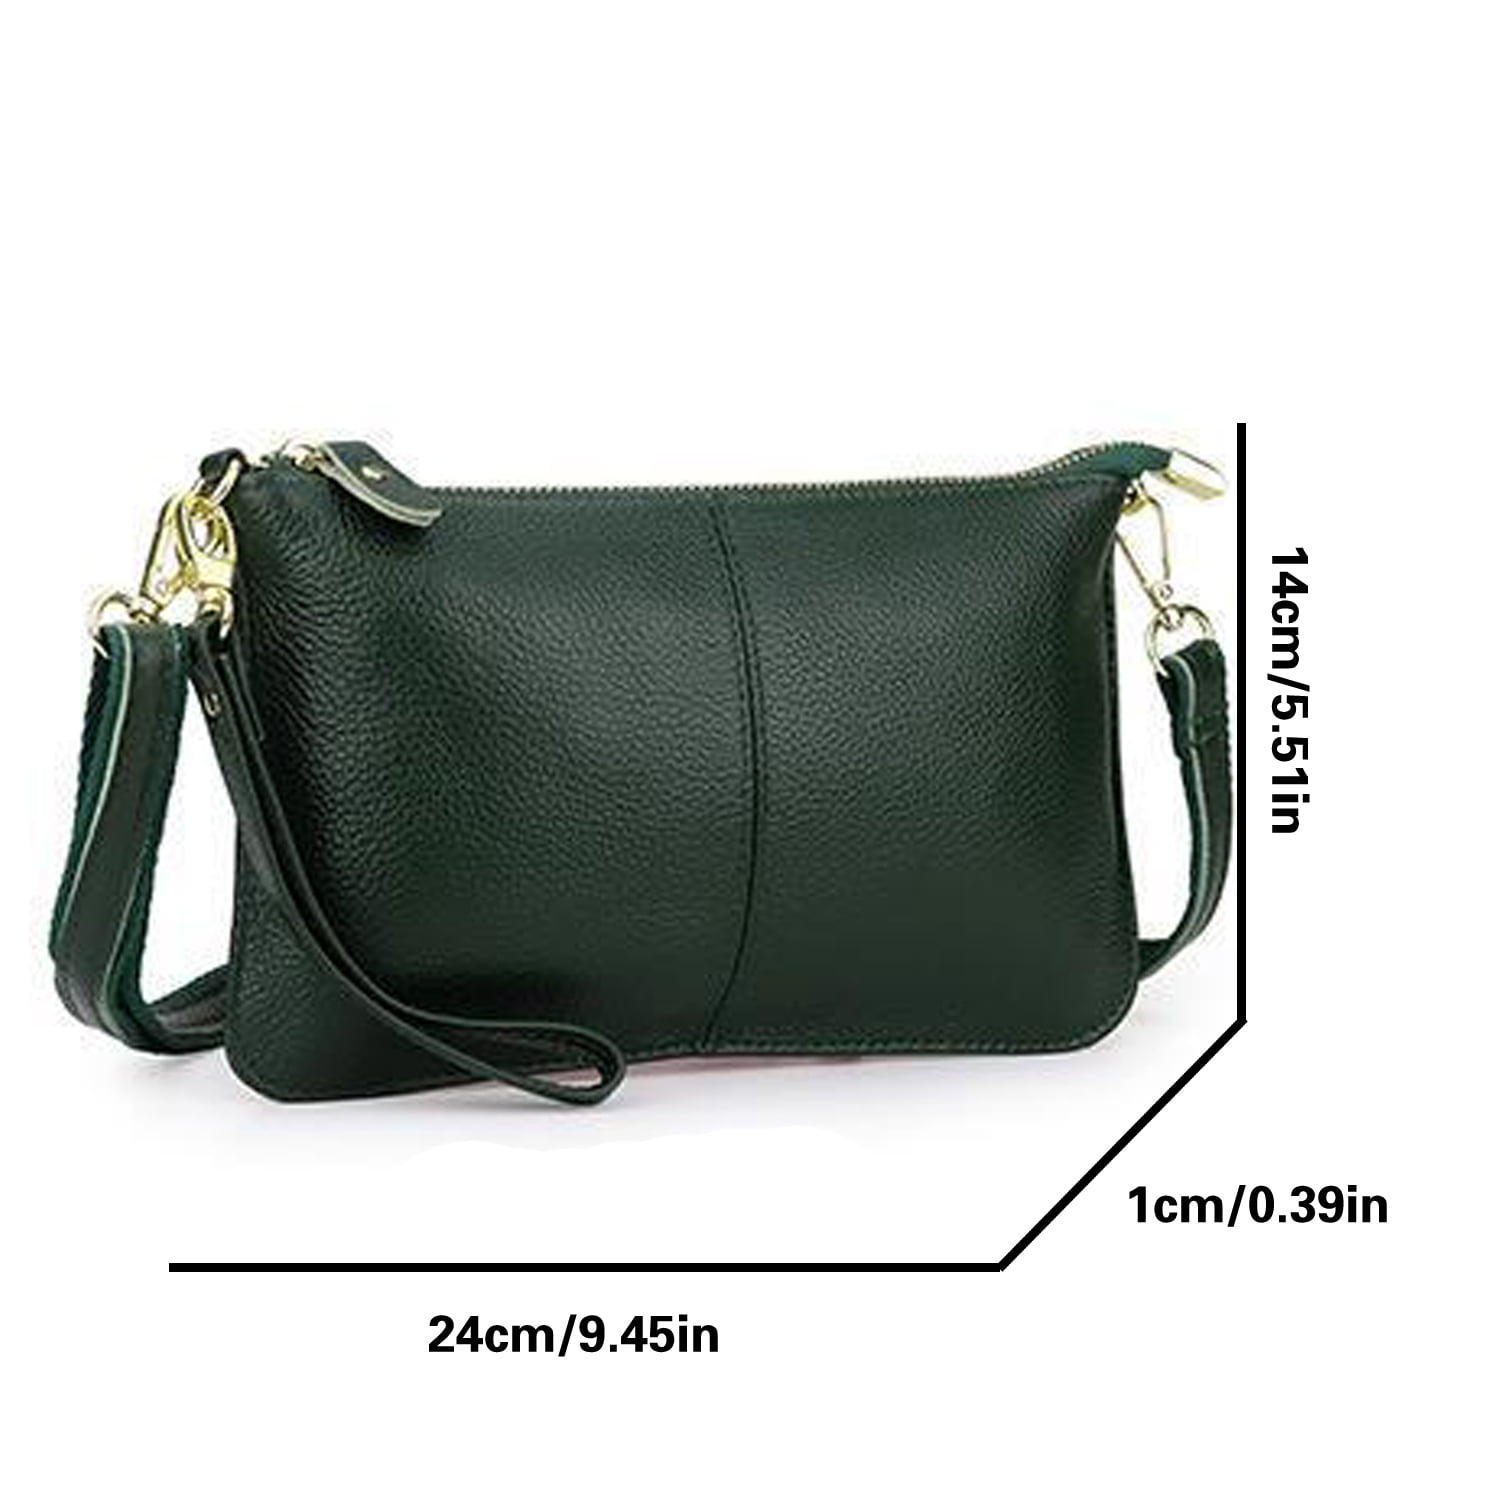 Buy Satchel Purse Lady Shoulder Bag Church Purse Patent Leather Handbag Top  Handle Women's Shell Bag (S-size-Green) at Amazon.in